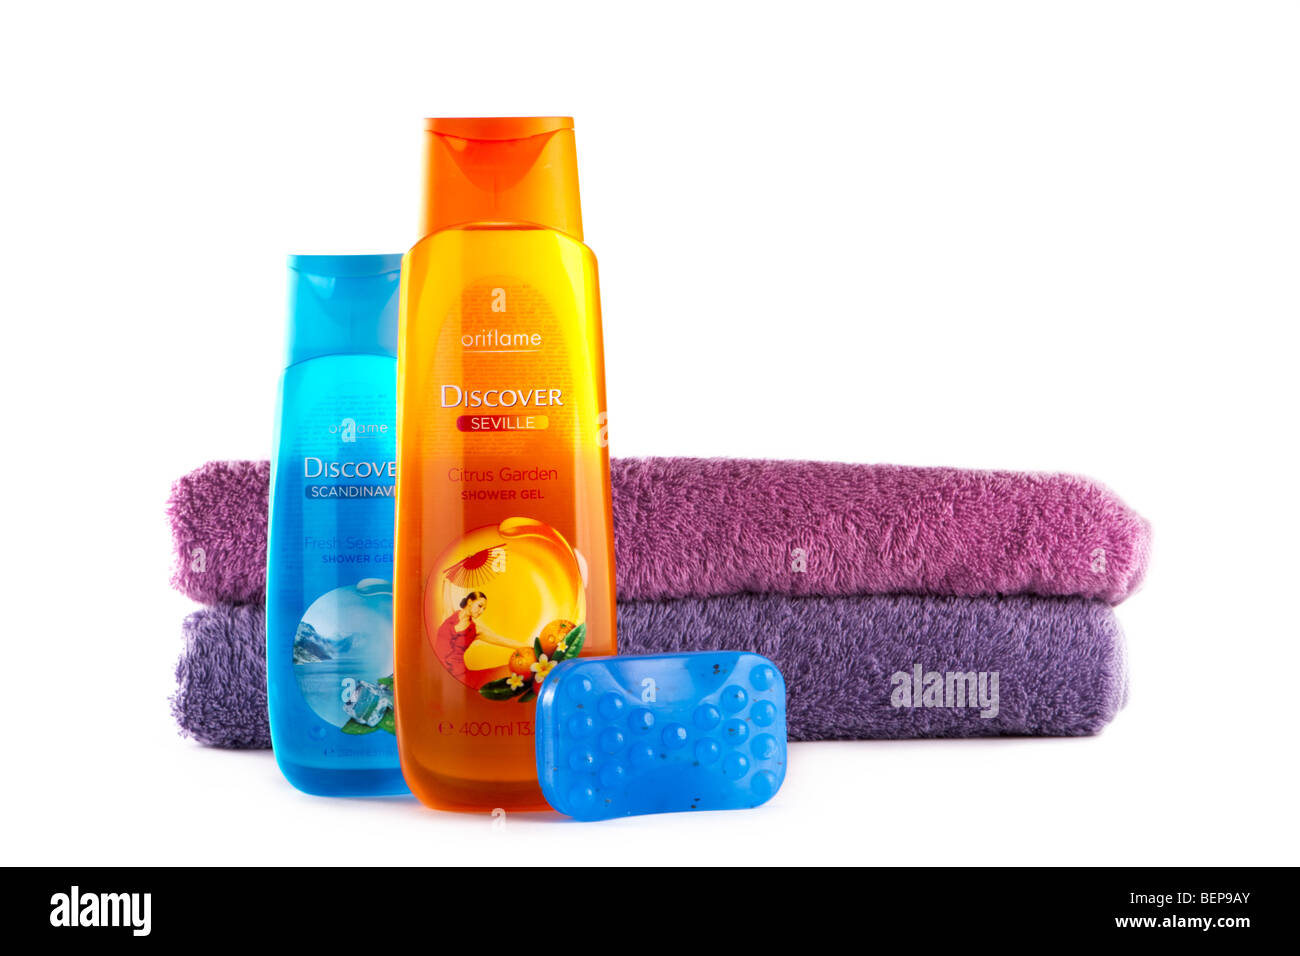 Bath and shower accessories: two bottle of the shower gel, one piece of soap, two towels. Stock Photo